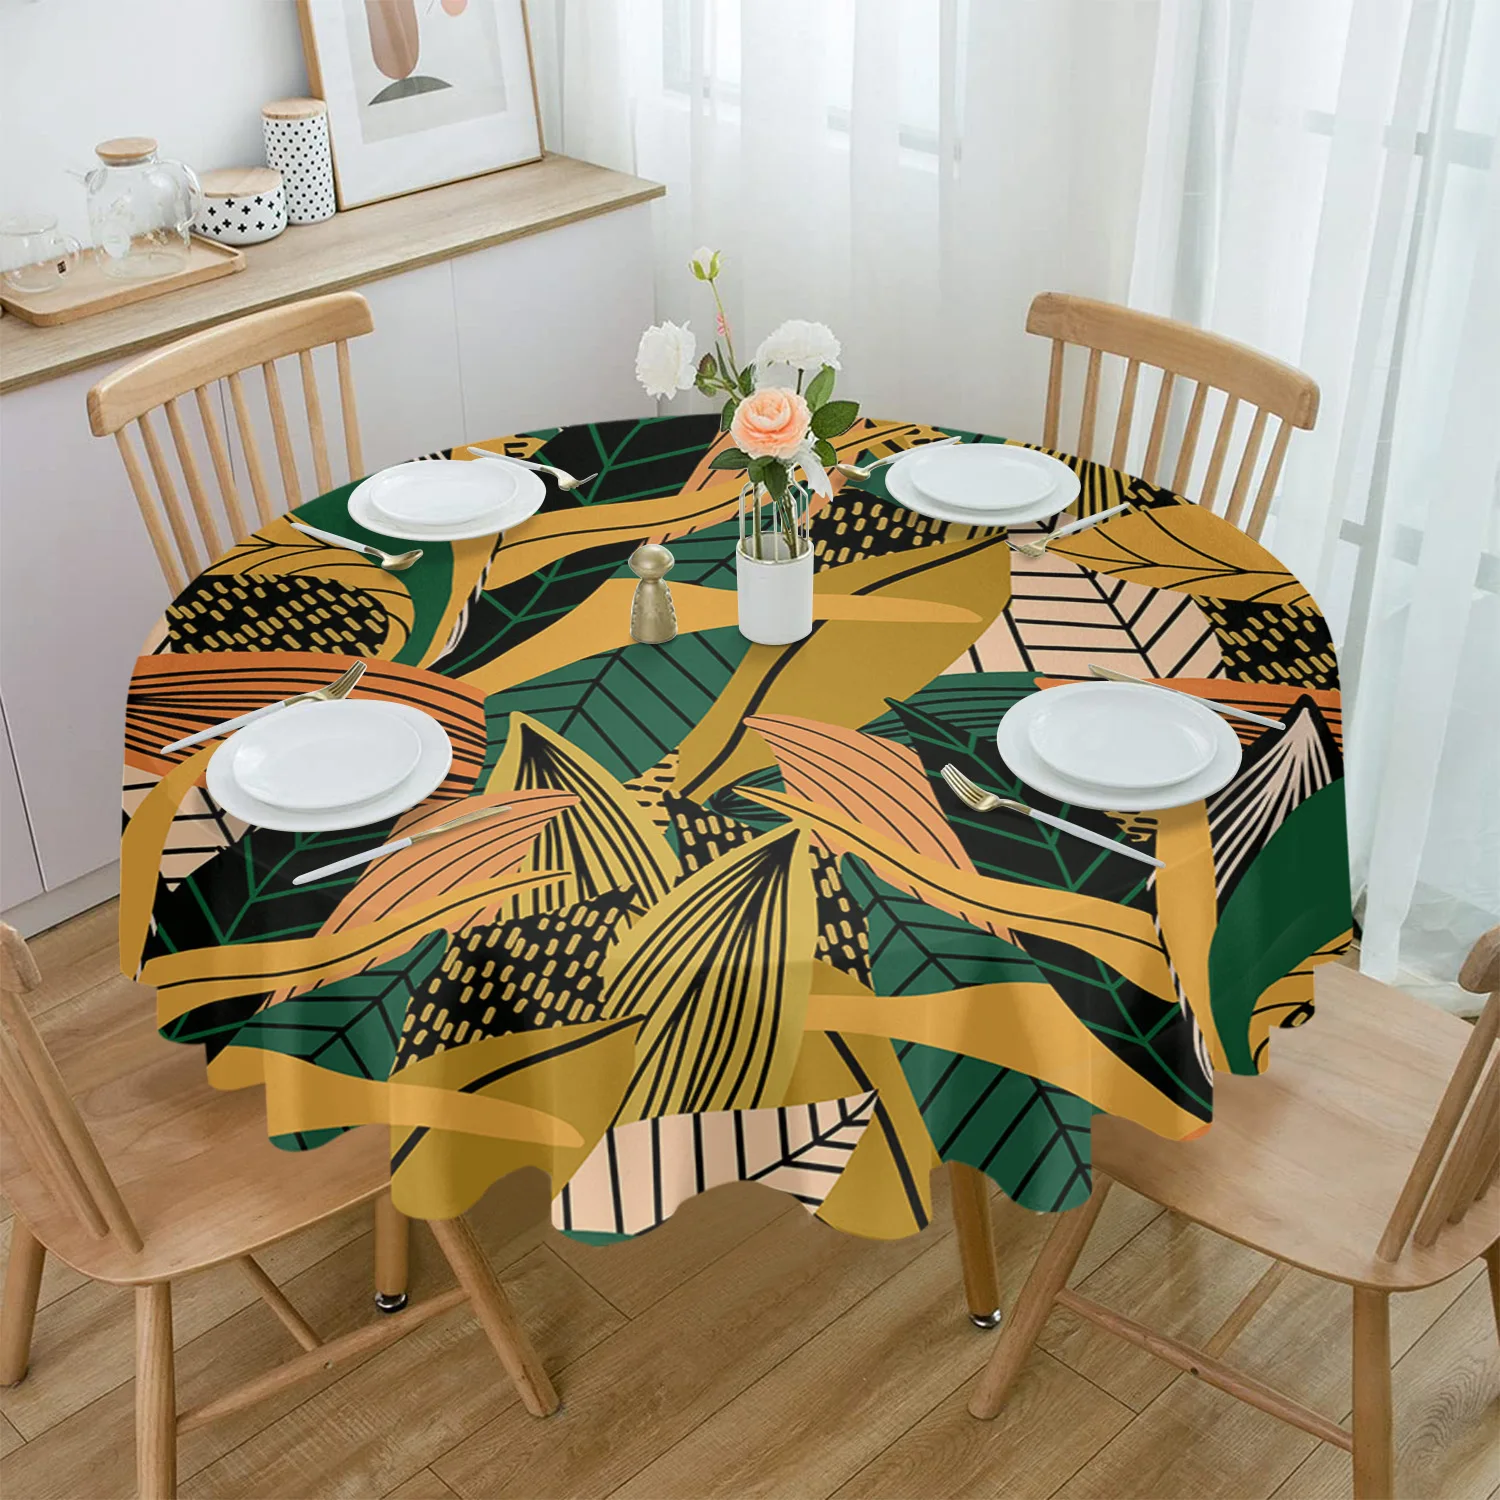 

Leaves Lines Hand-painted Polka Dots Waterproof Tablecloth Table Decoration Wedding Home Kitchen Dining Room Round Table Cover